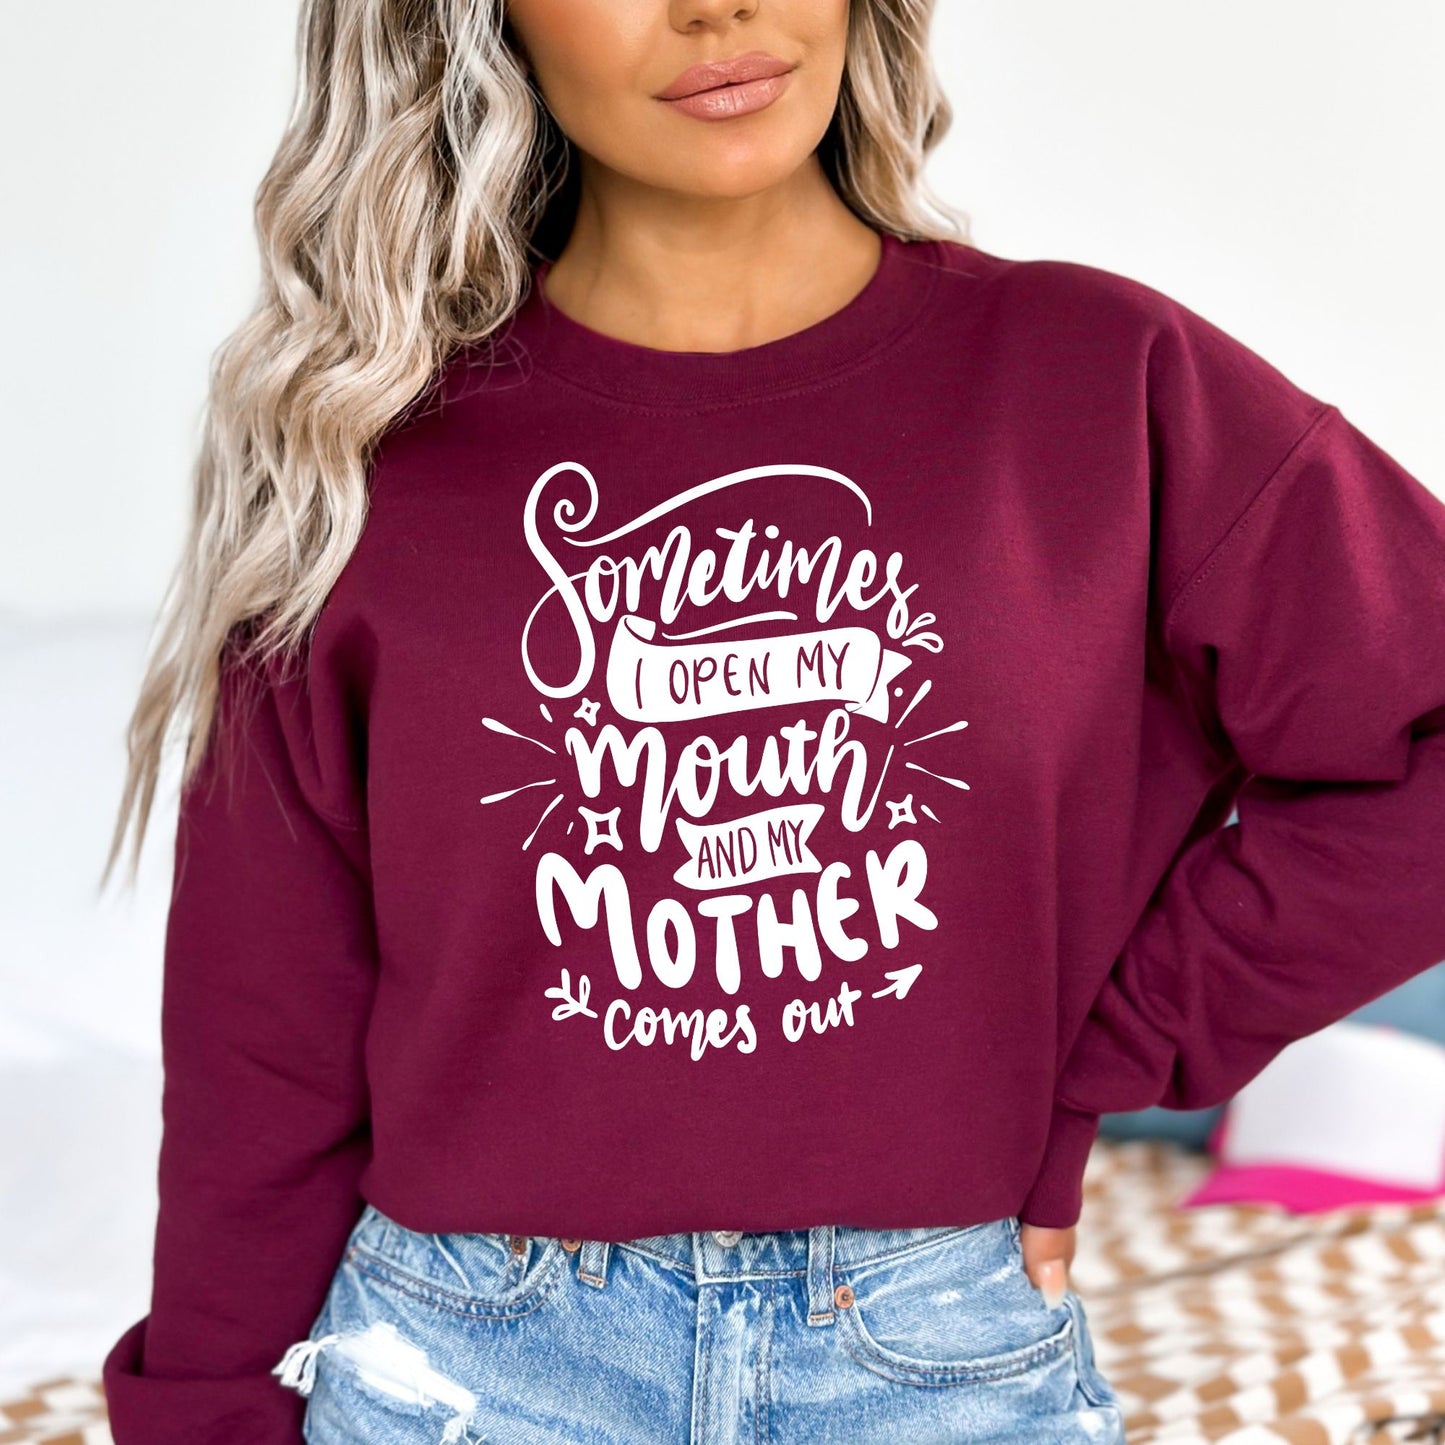 Sometimes I Open My Mouth and My Mother Comes Out Pulllover Crewneck Sweatshirt